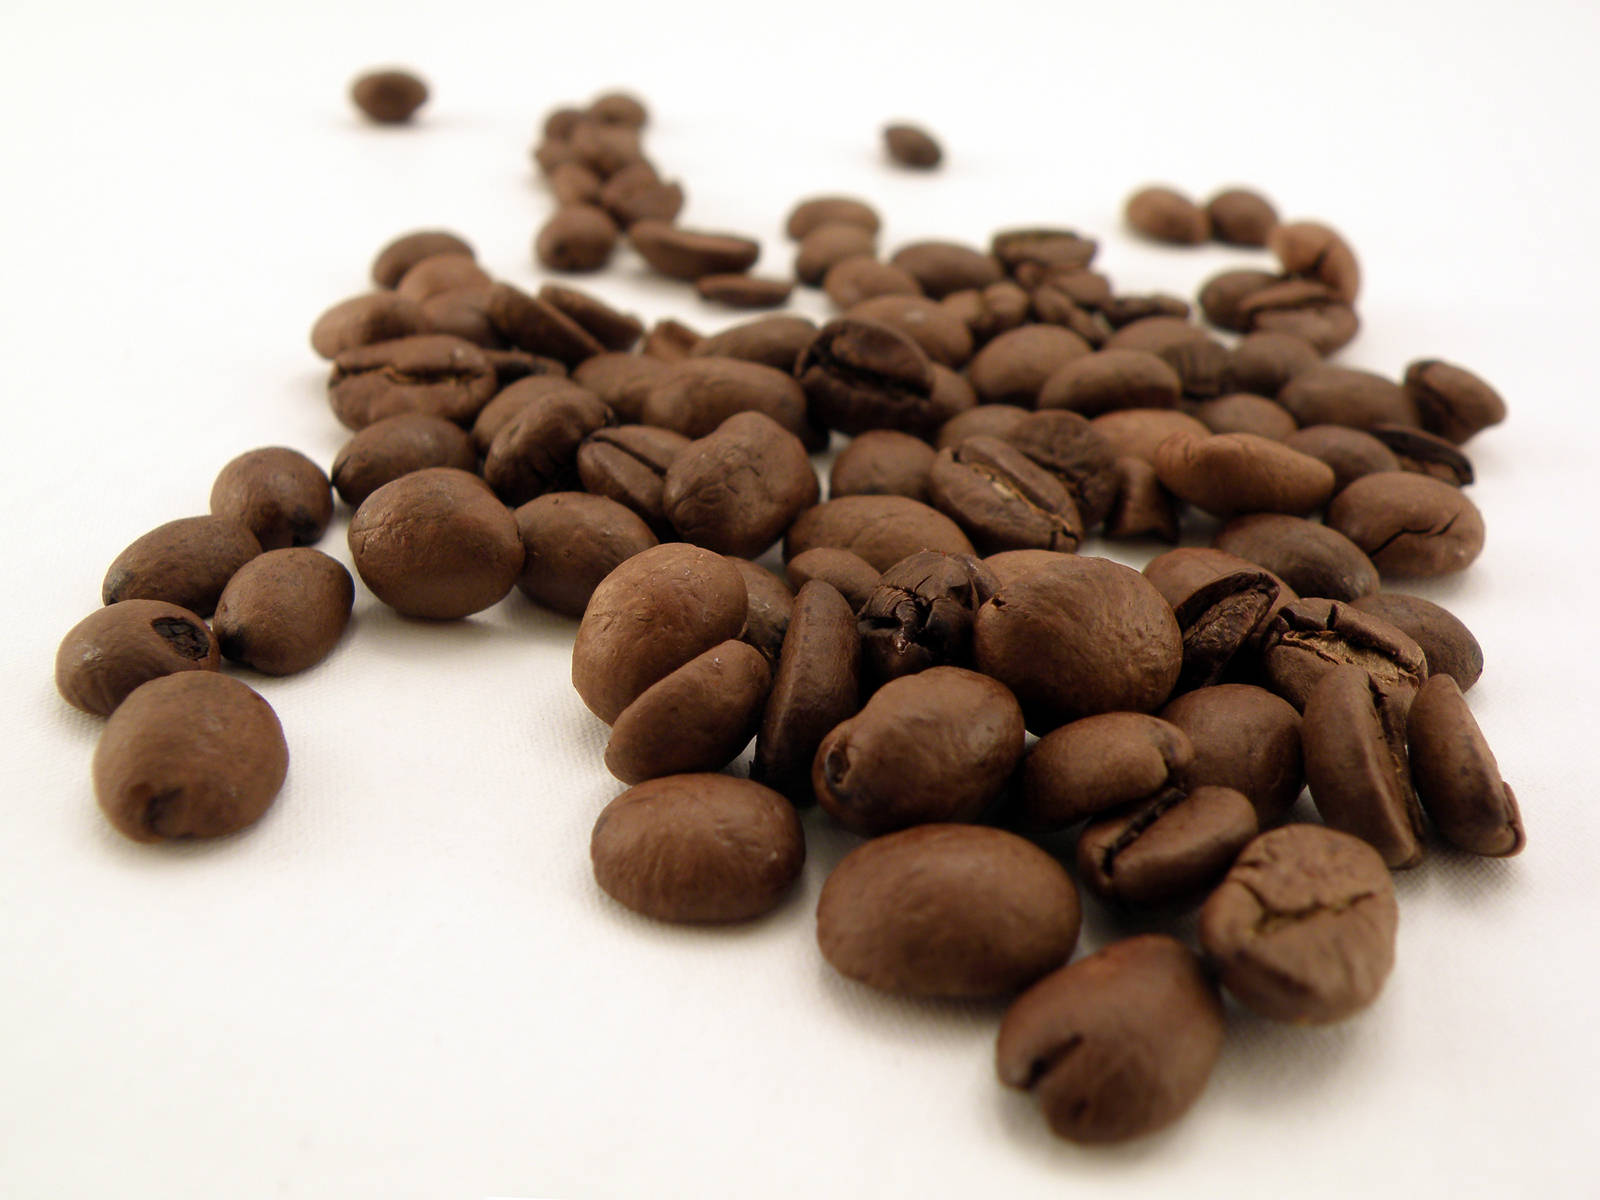 Perpsective Image Of Coffee Beans Background